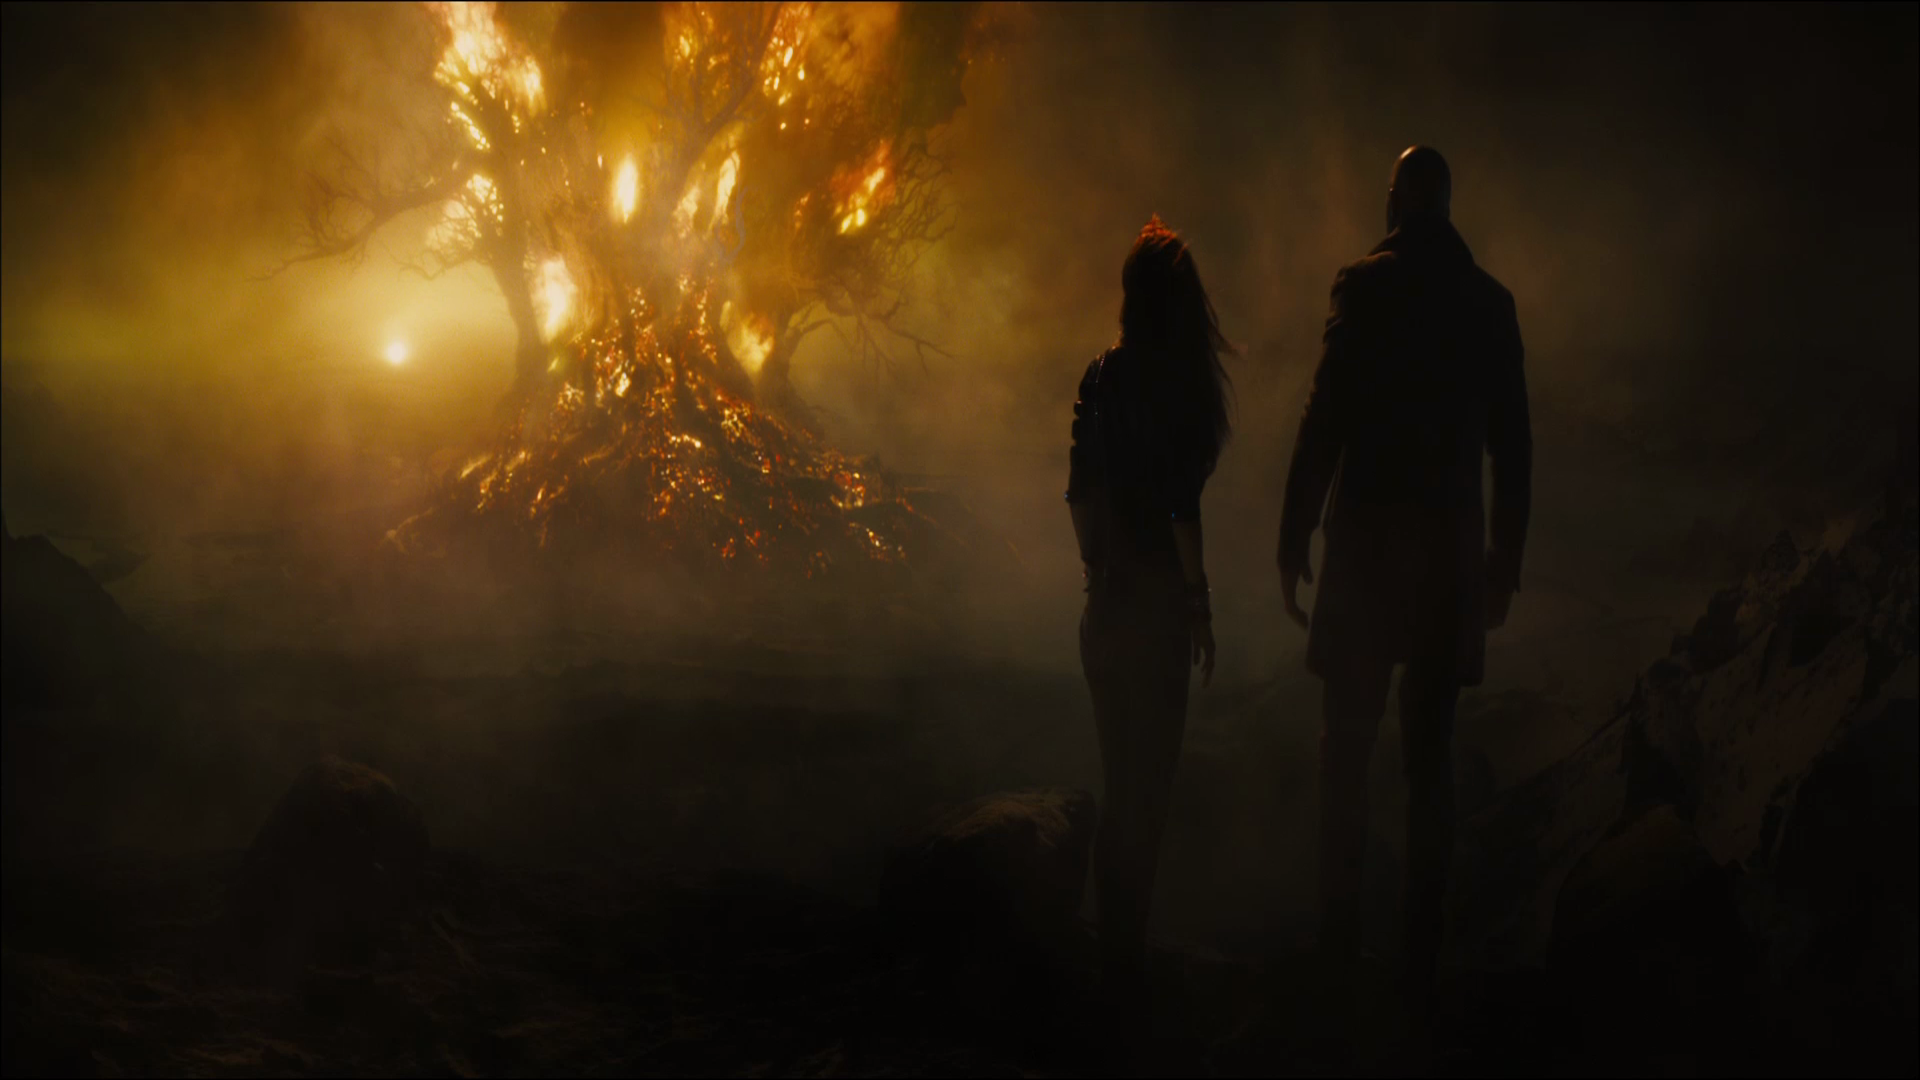 The Last Witch Hunter is directed by Breck Eisner The release date